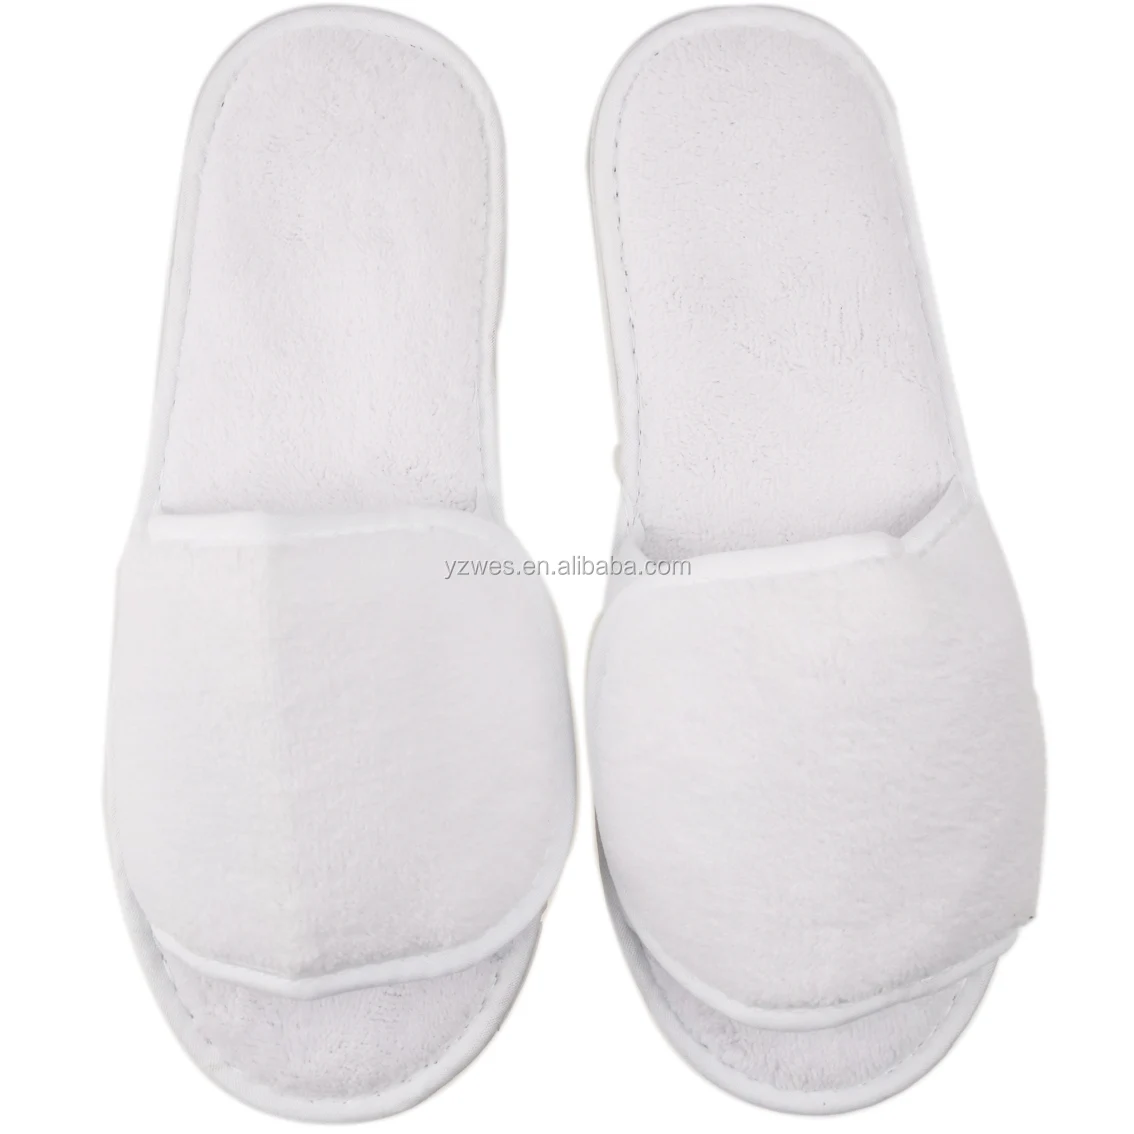 Hotel Disposable Washable Spa Slippers - Buy Spa Slippers,Washable Spa ...